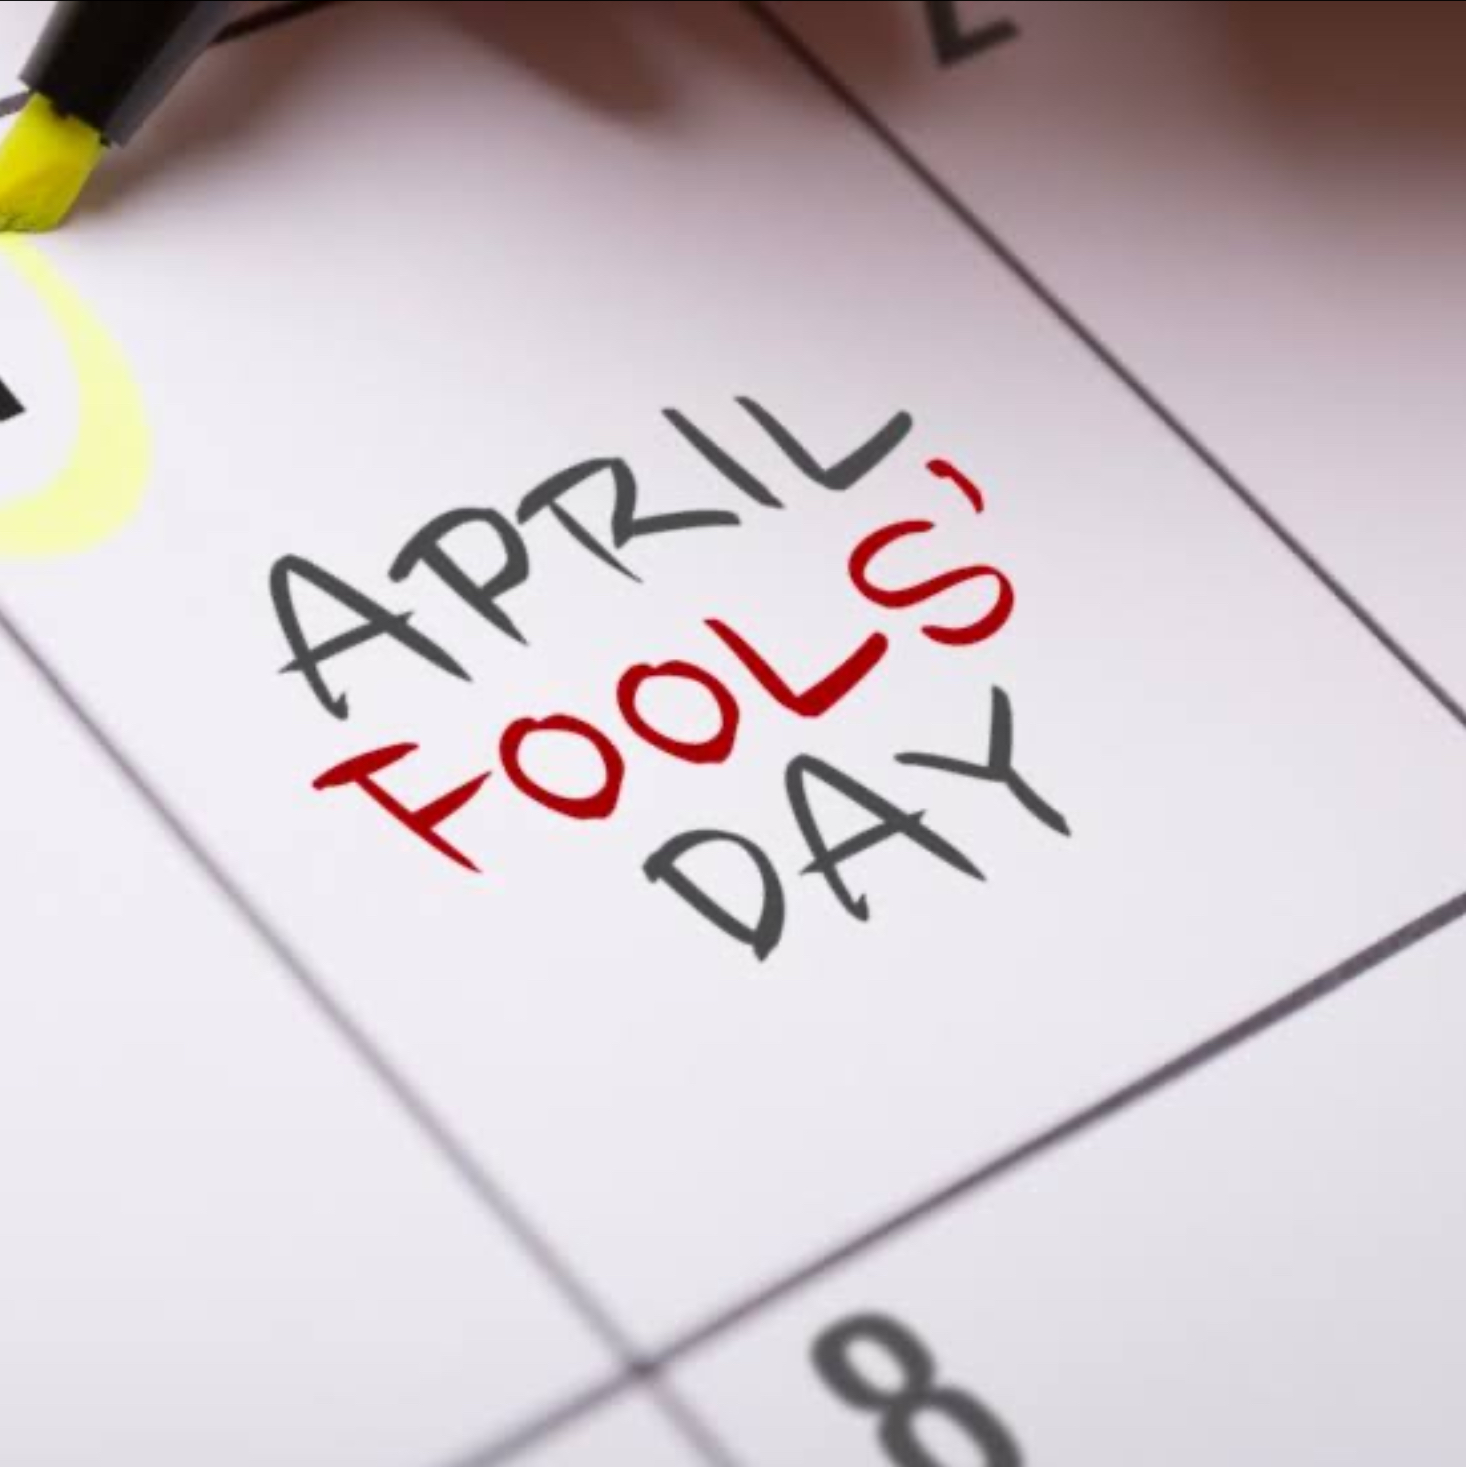 How April Fools’ Day Tradition Became Popularized